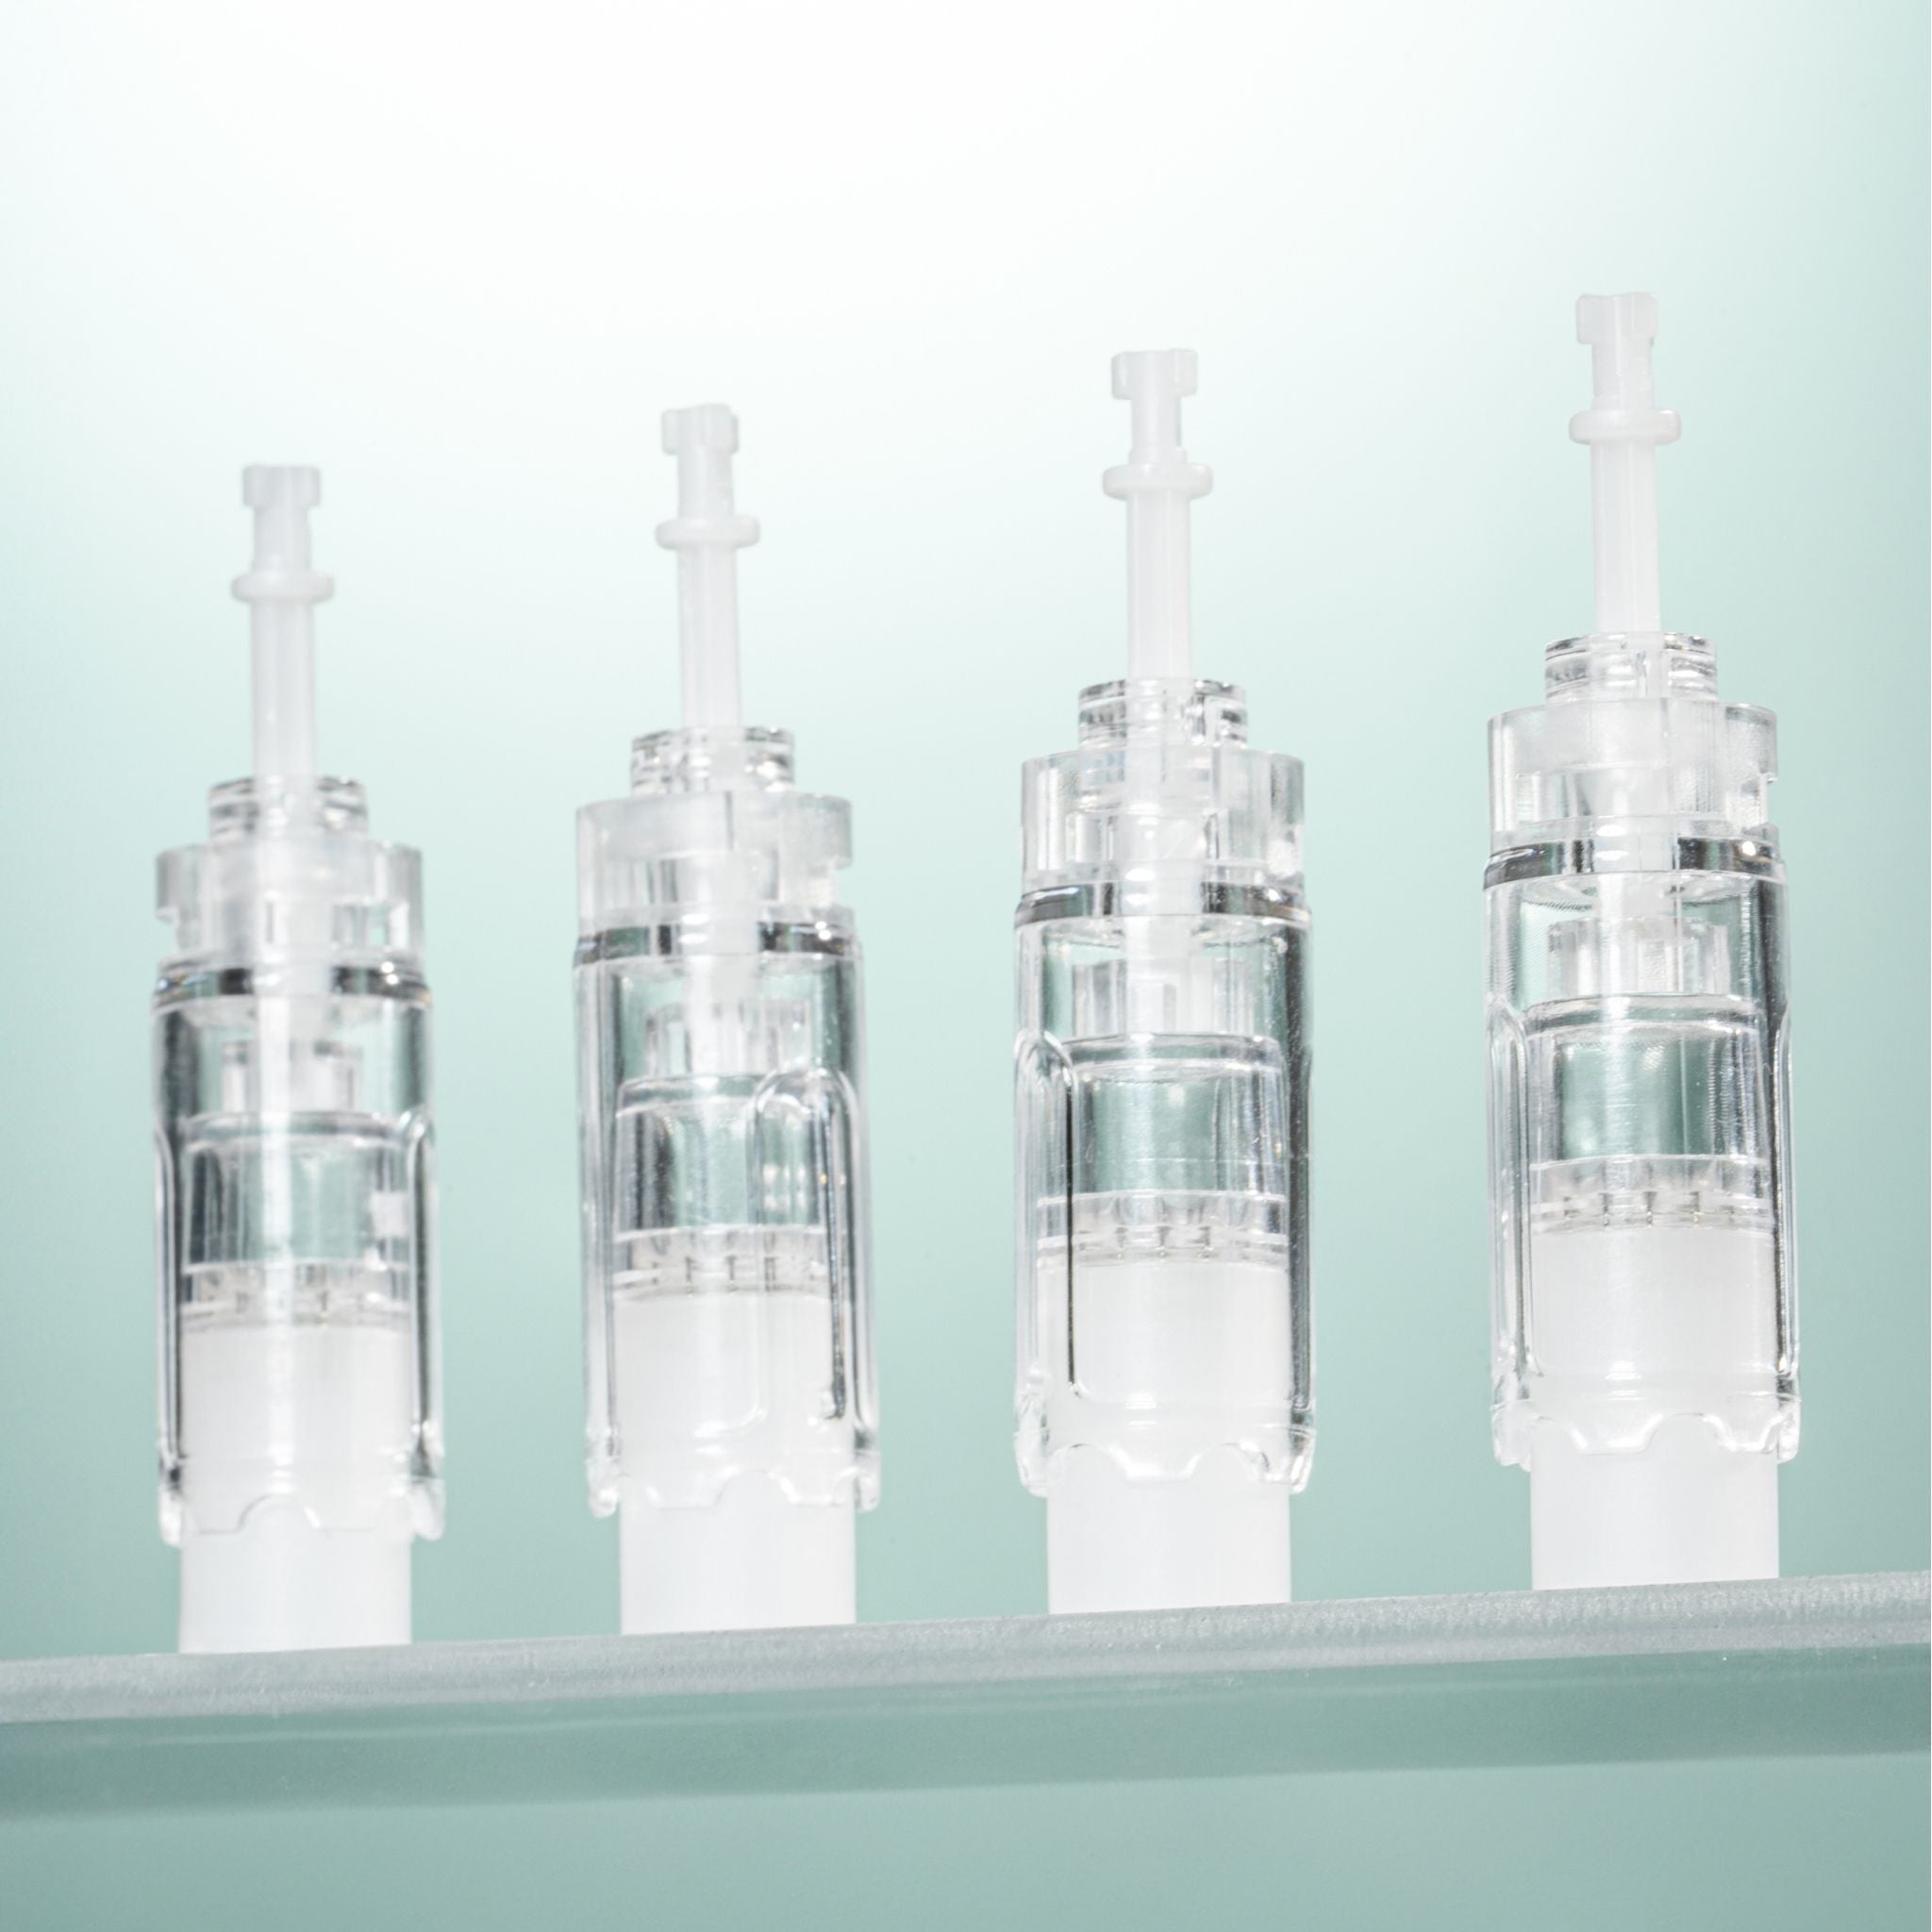 Professional microneedling cartridges for effective skin treatments